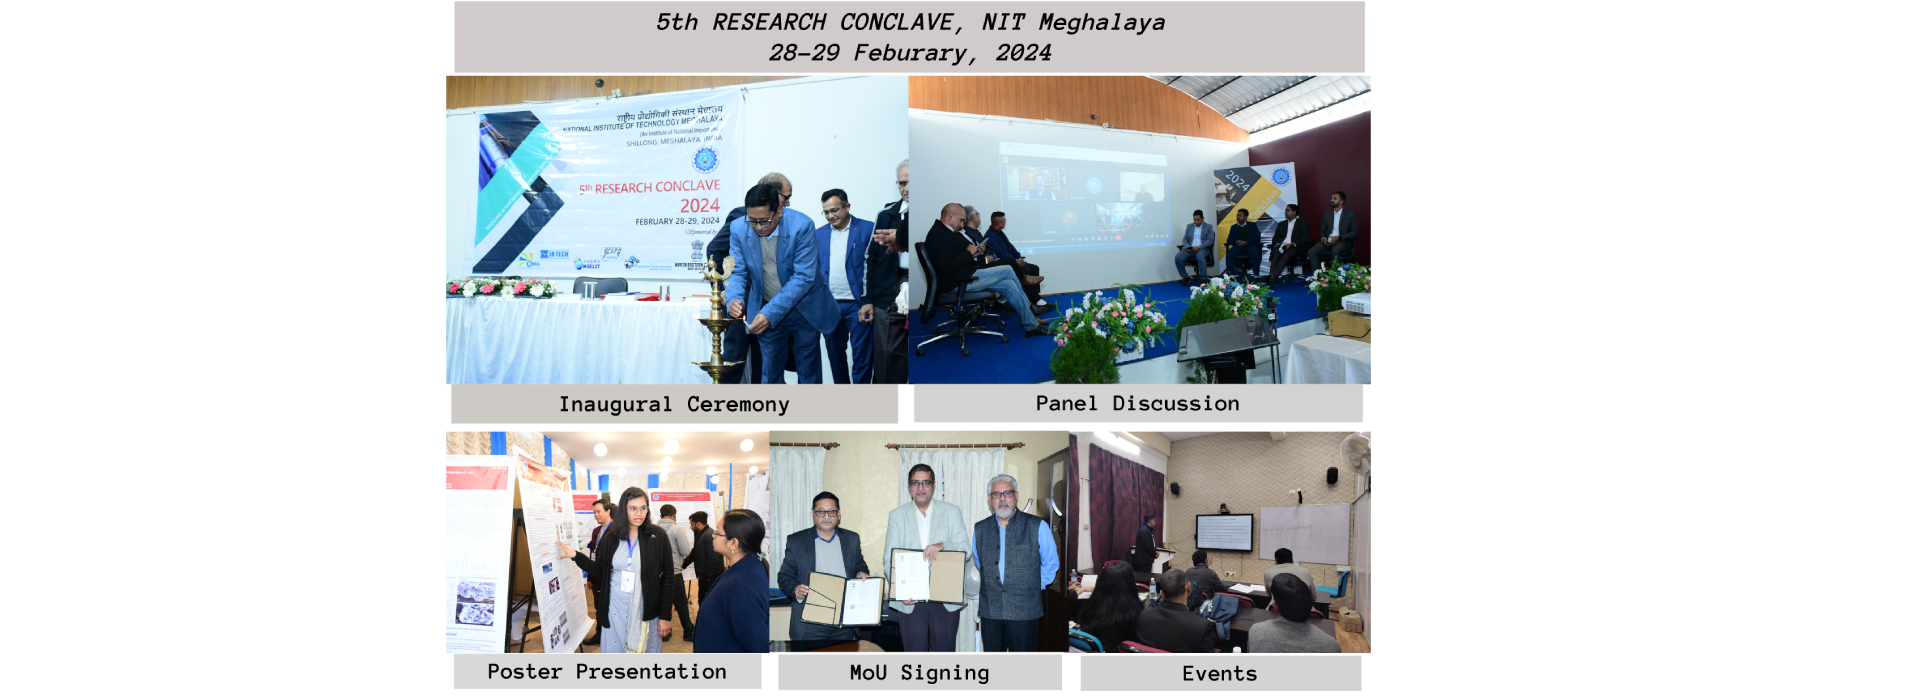 5th Research Conclave 